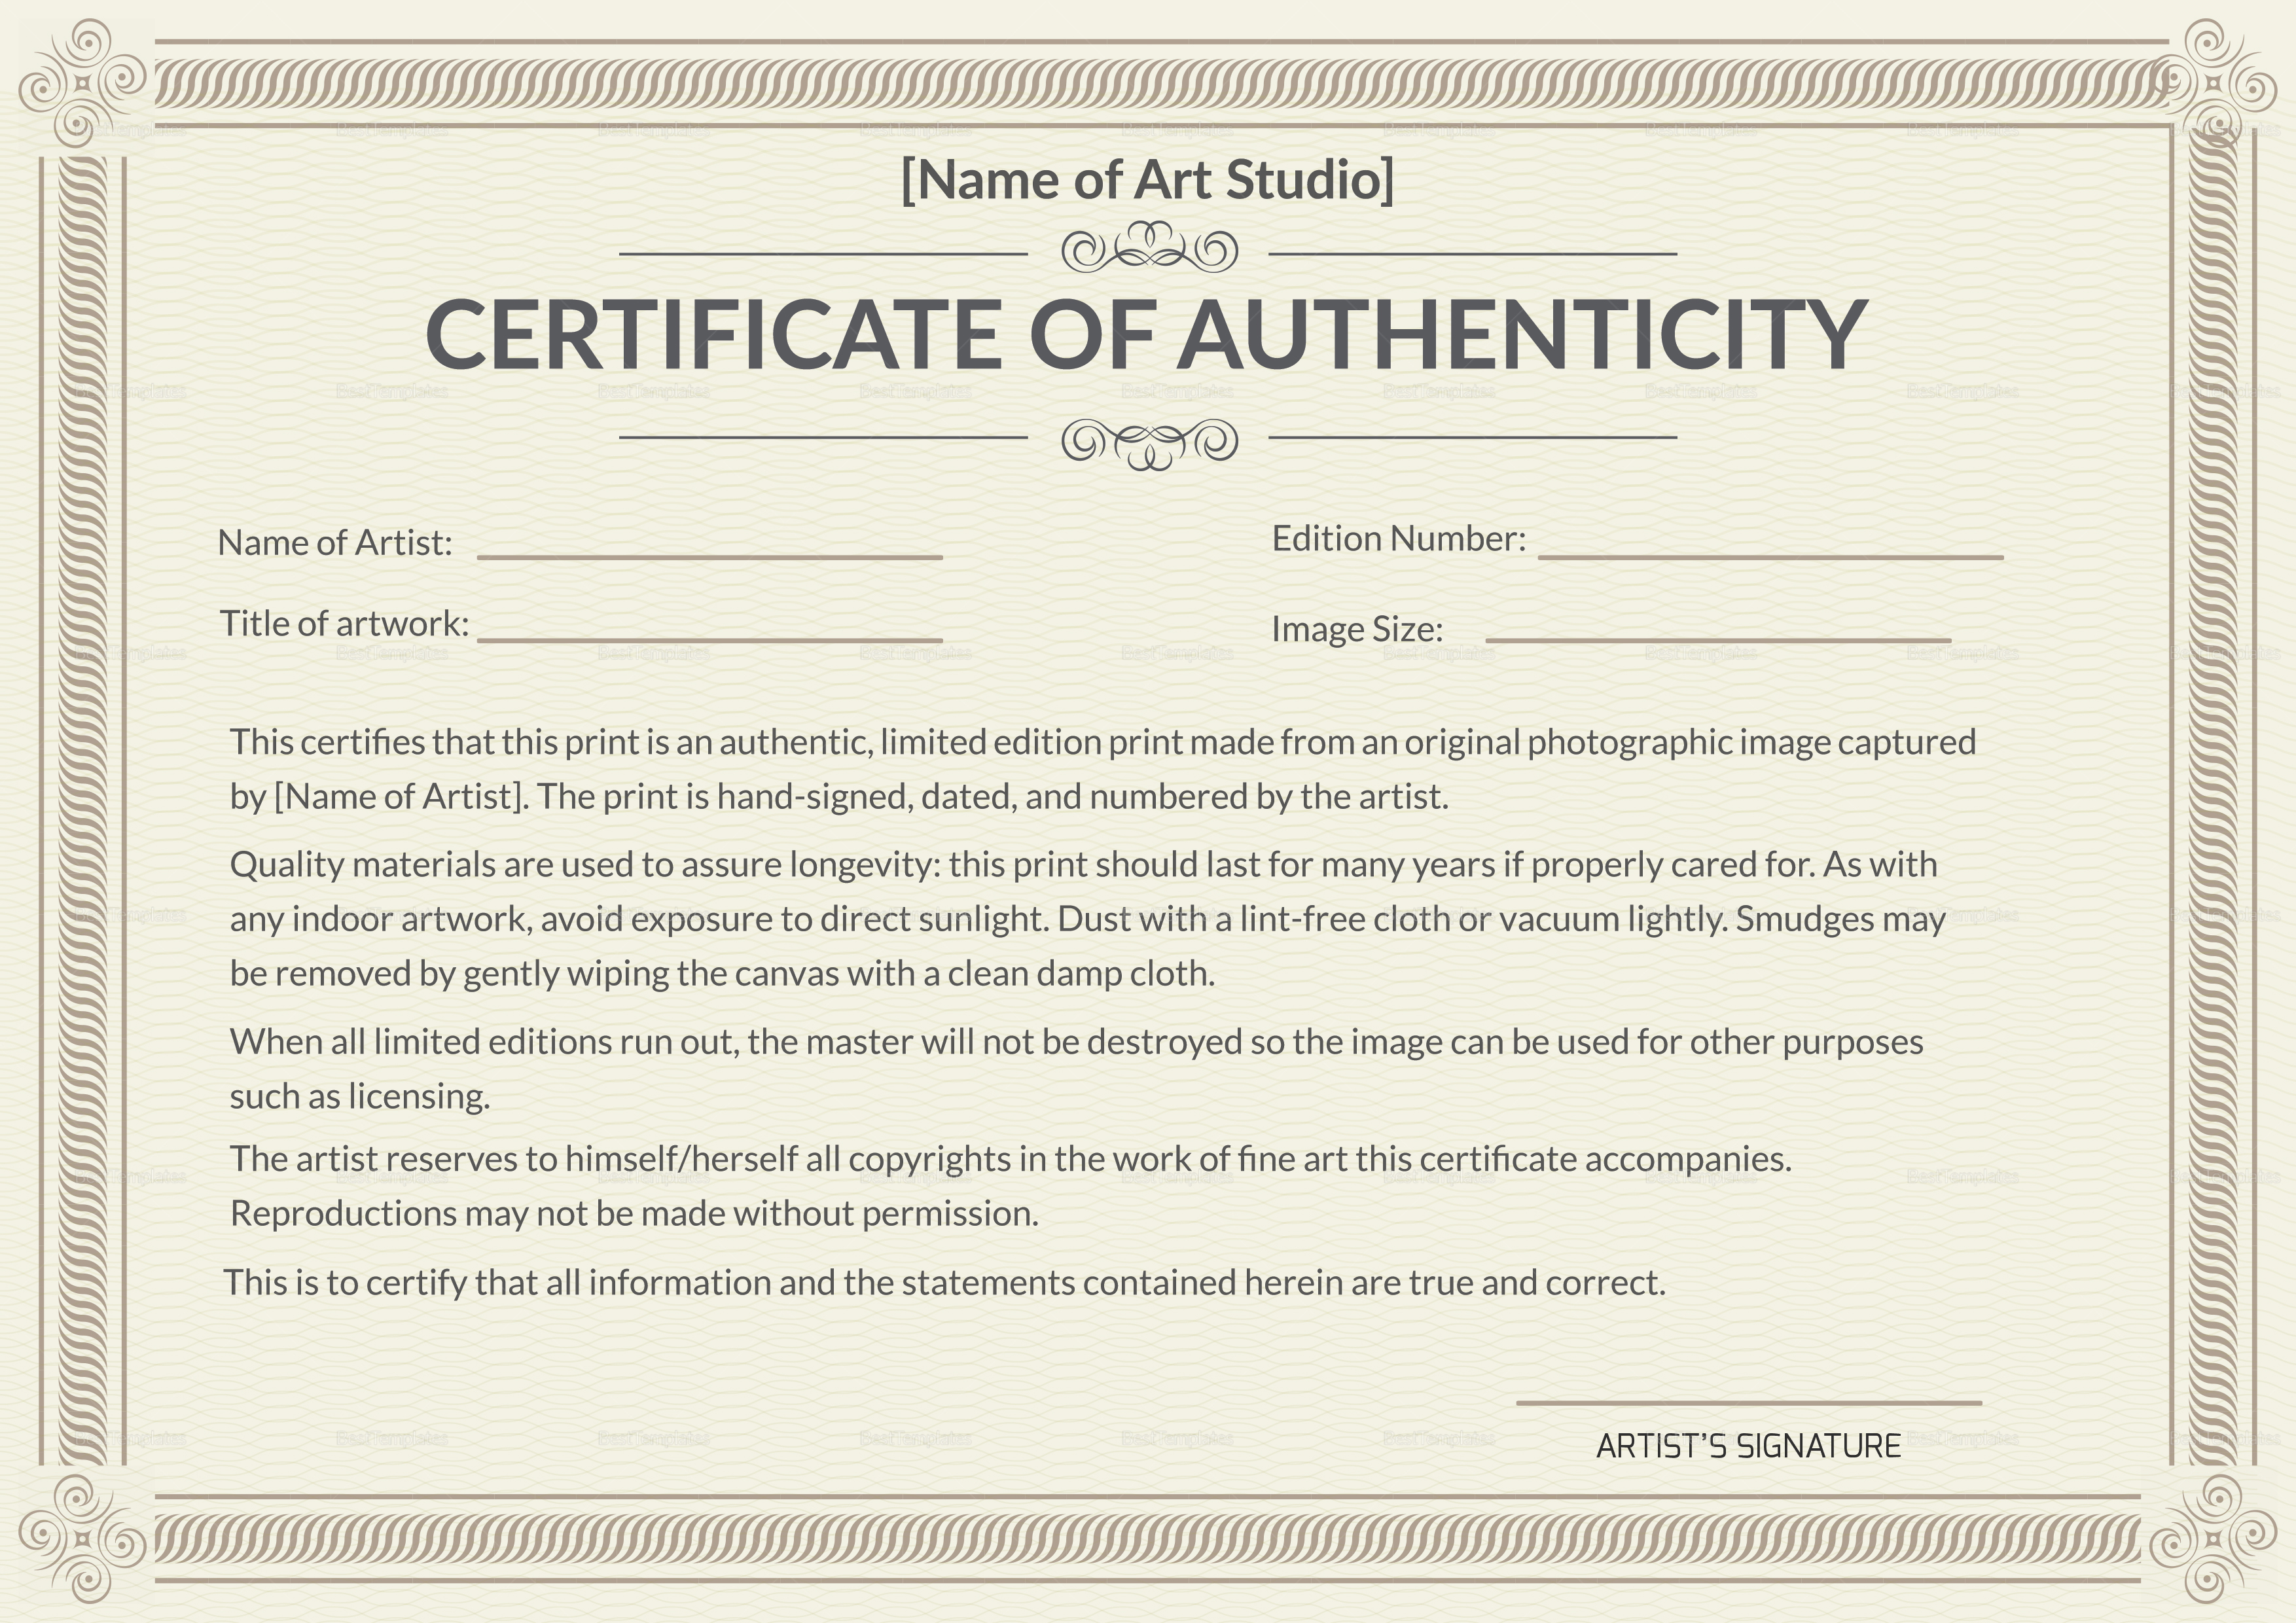 Certificate Templates: Template Certificate Of Authenticity Throughout Photography Certificate Of Authenticity Template